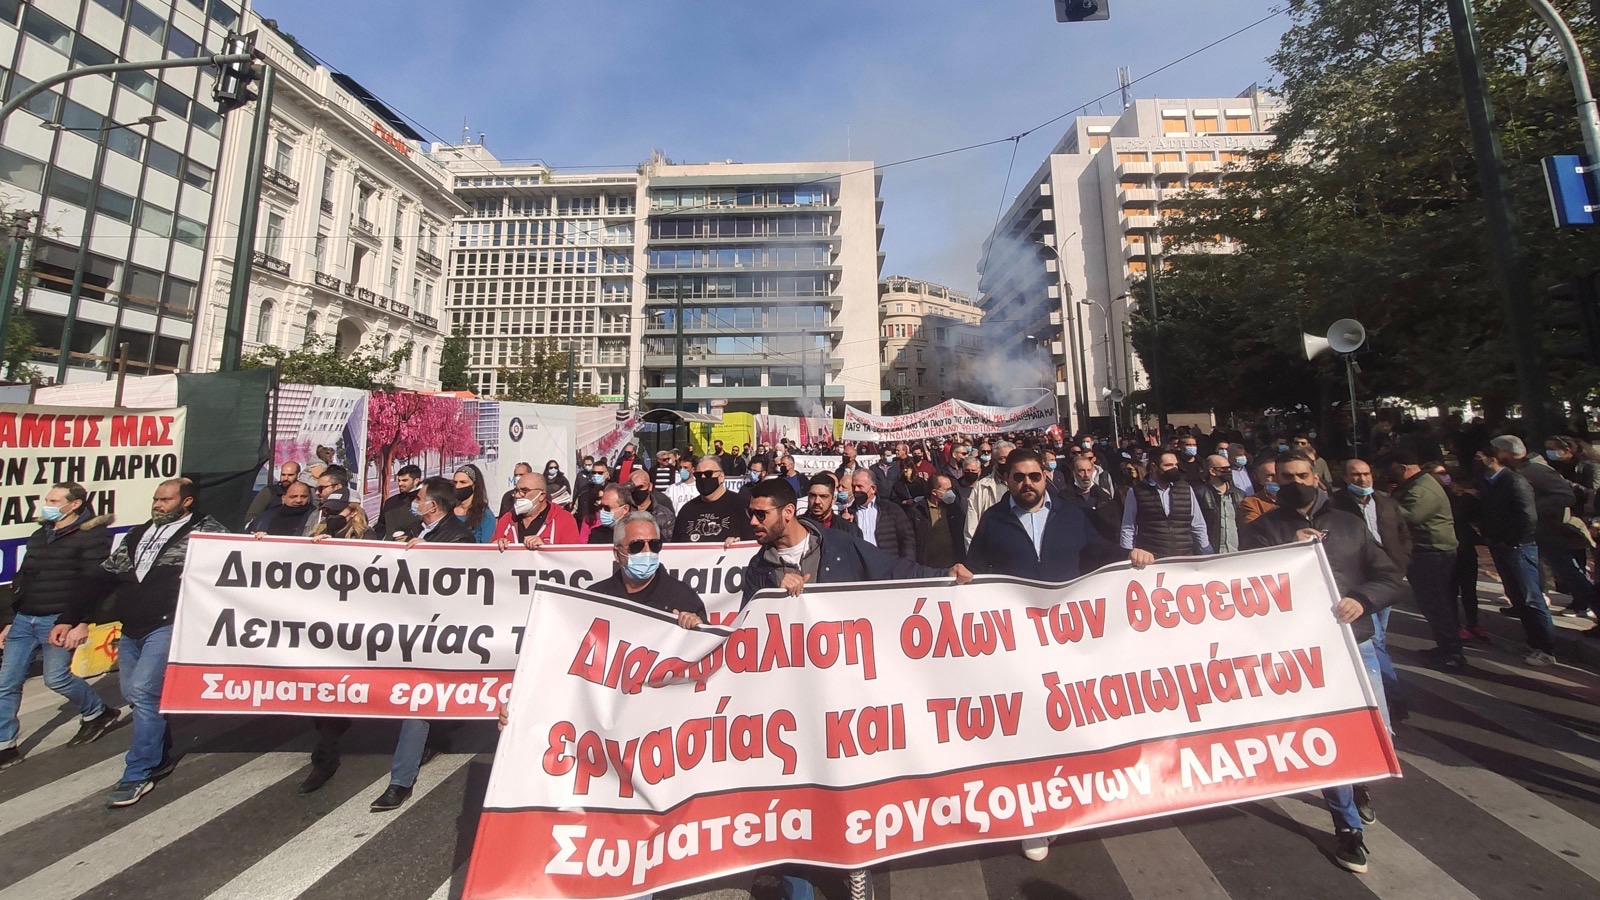 LARCO Workers Protest- Greece